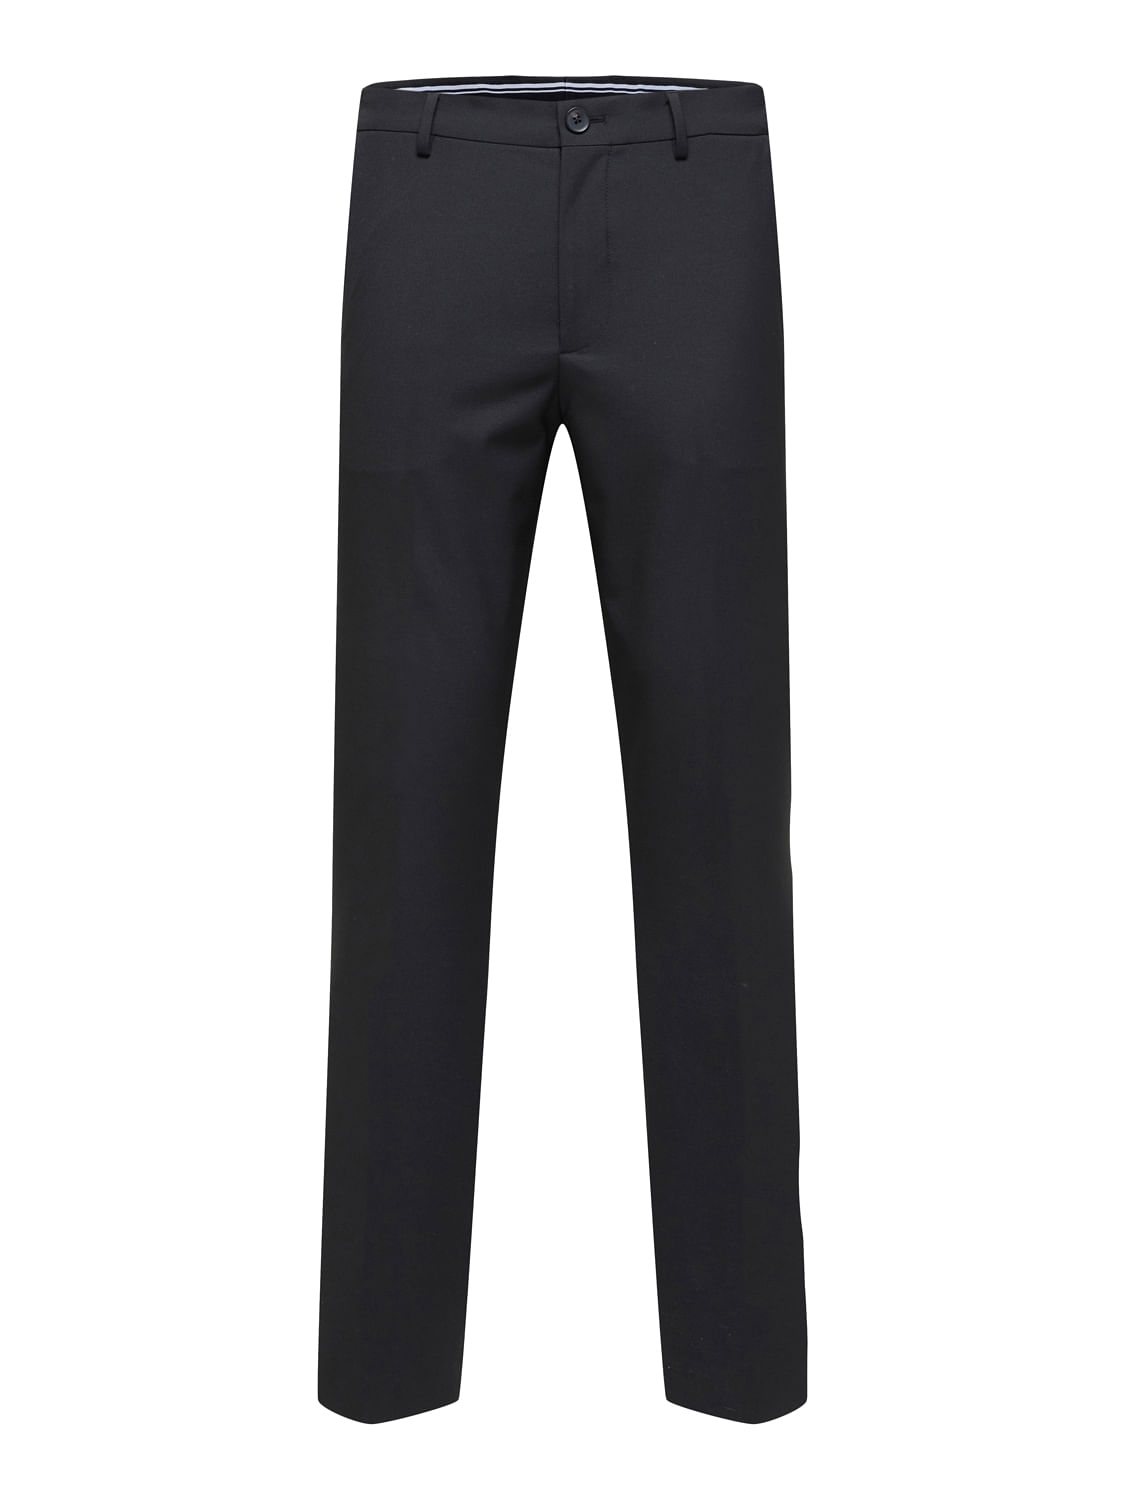 Tailored wide leg black trousers for men | AD USA